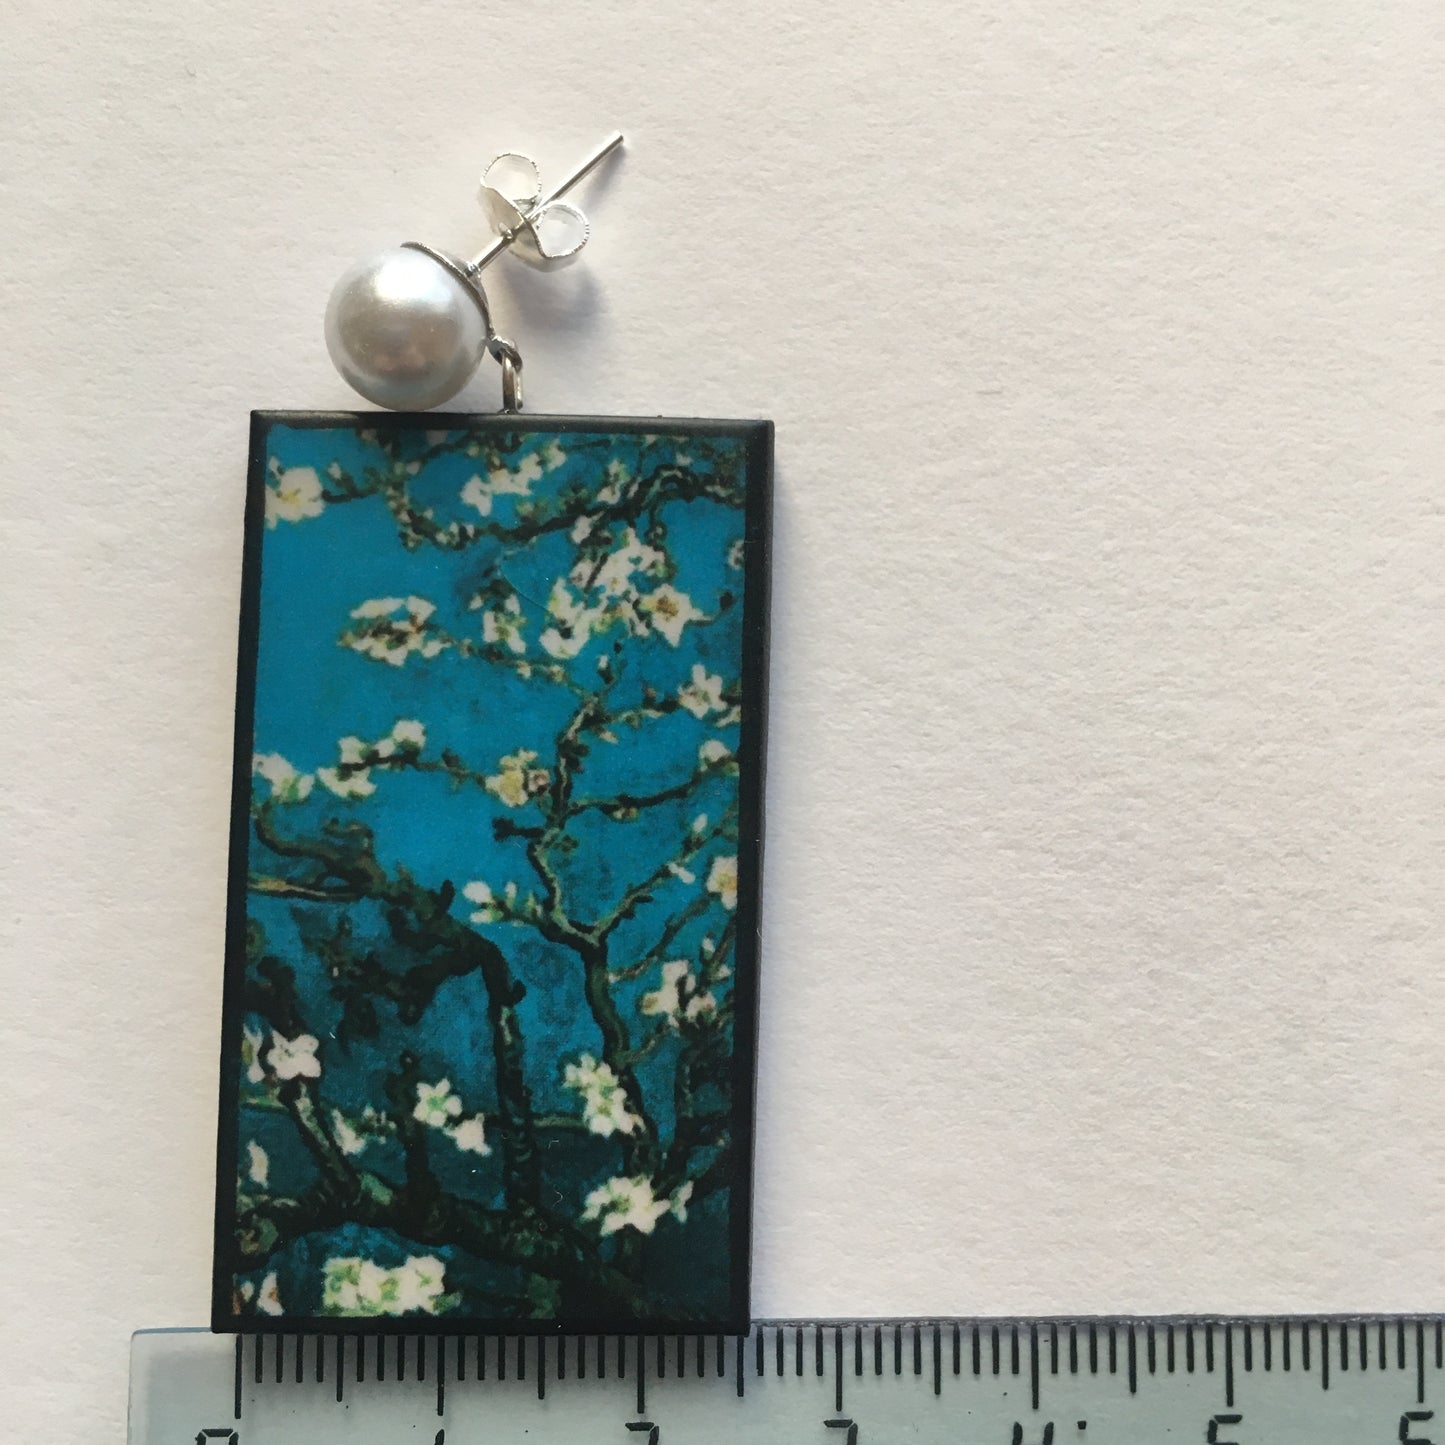 Stud pearls earrings with an art detail of the painting Almond Blossom by Vincent Van Gogh. These rectangular, turquoise background earrings are handmade from sustainable wood by Obljewellery.